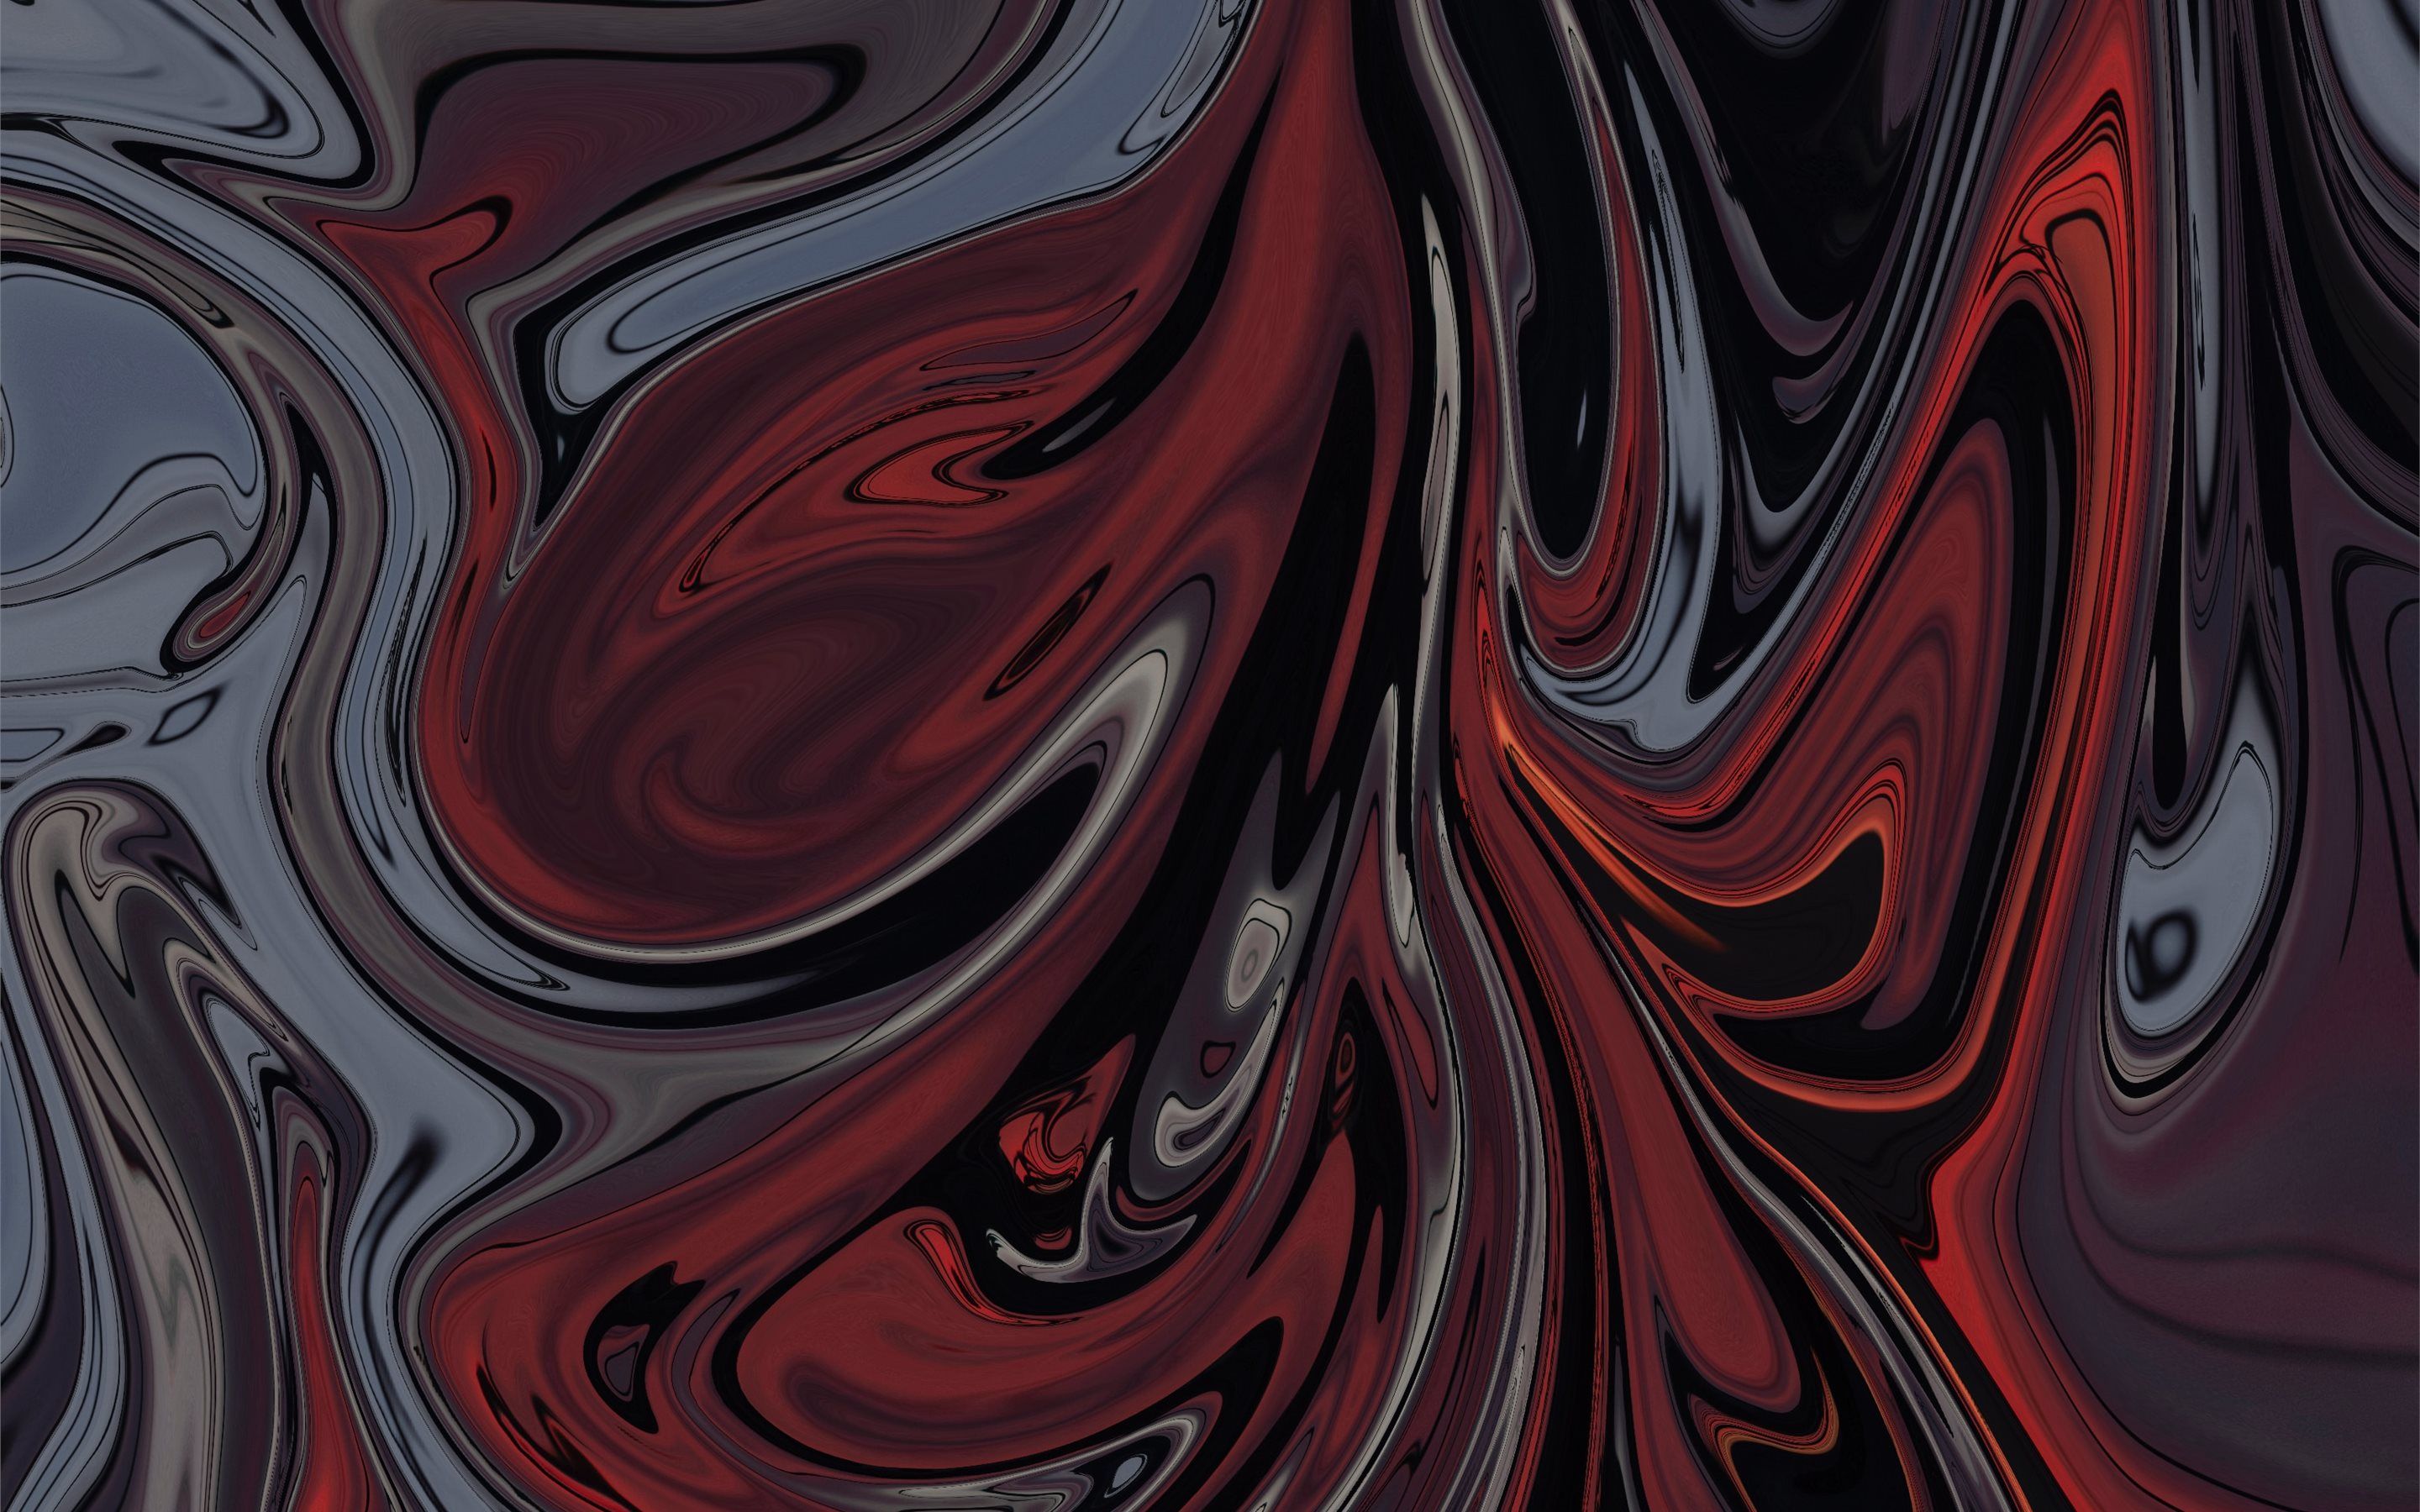 A red and black abstract painting - Modern